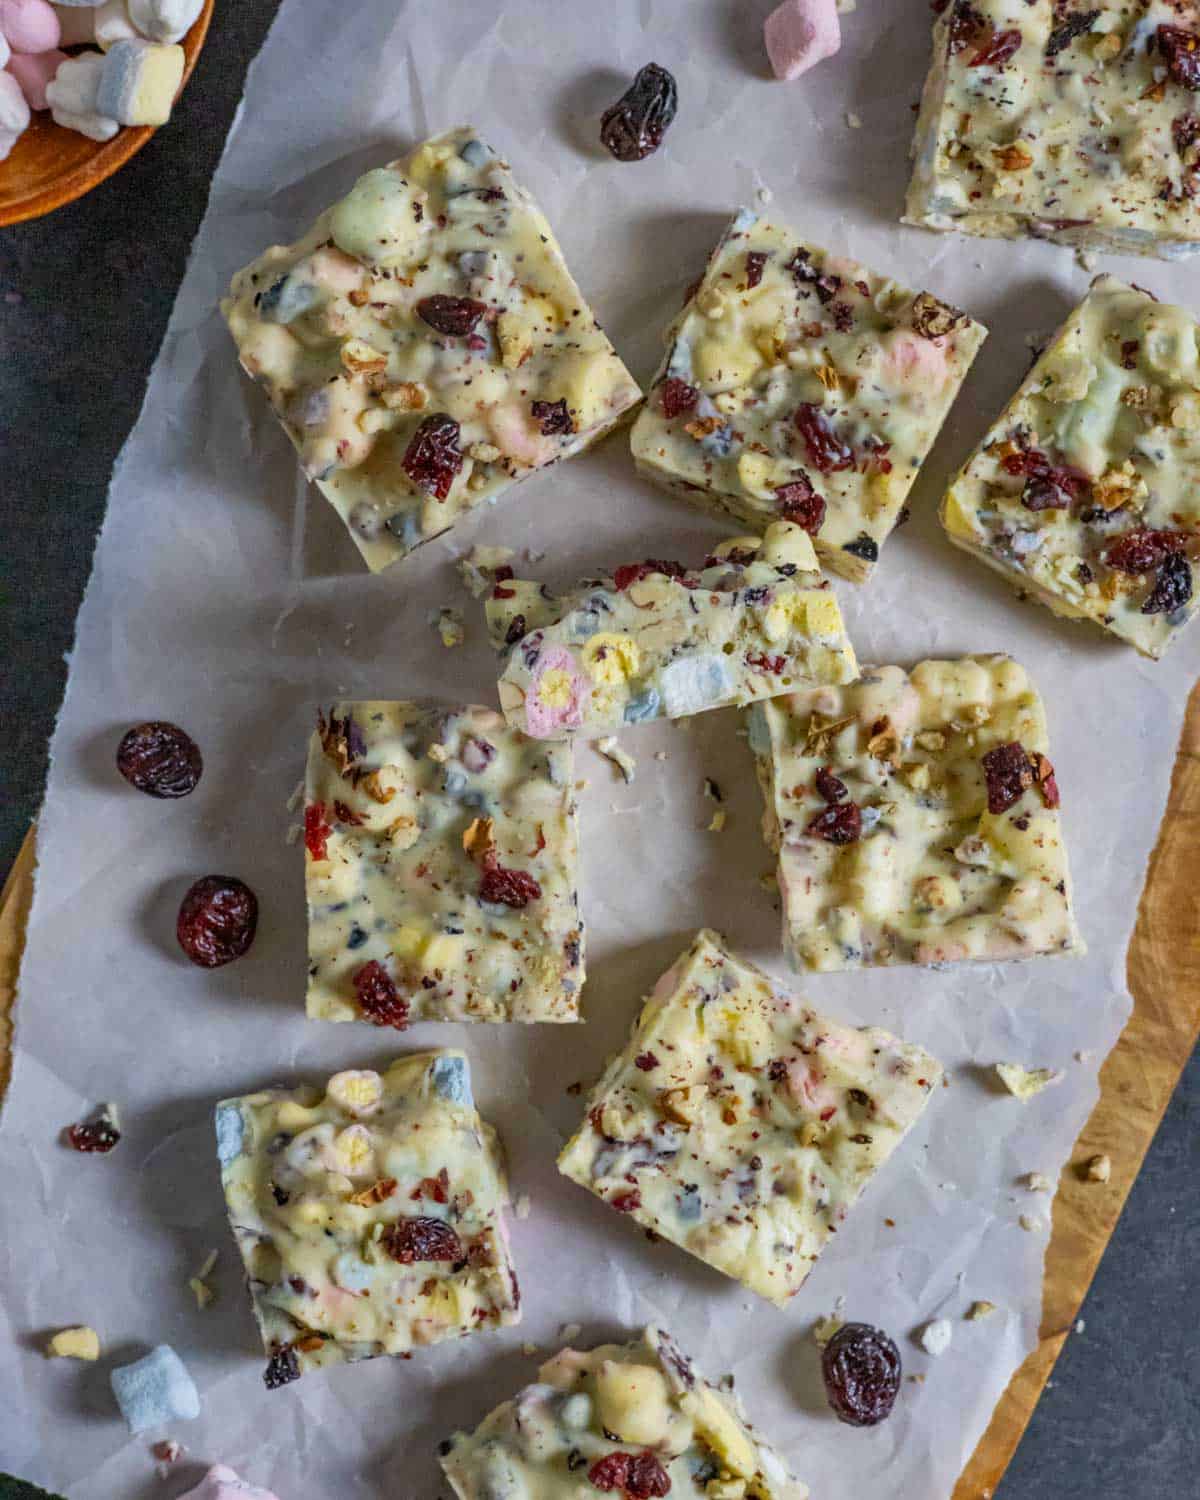 Squares of rocky road topped with dried cranberries on parchment.